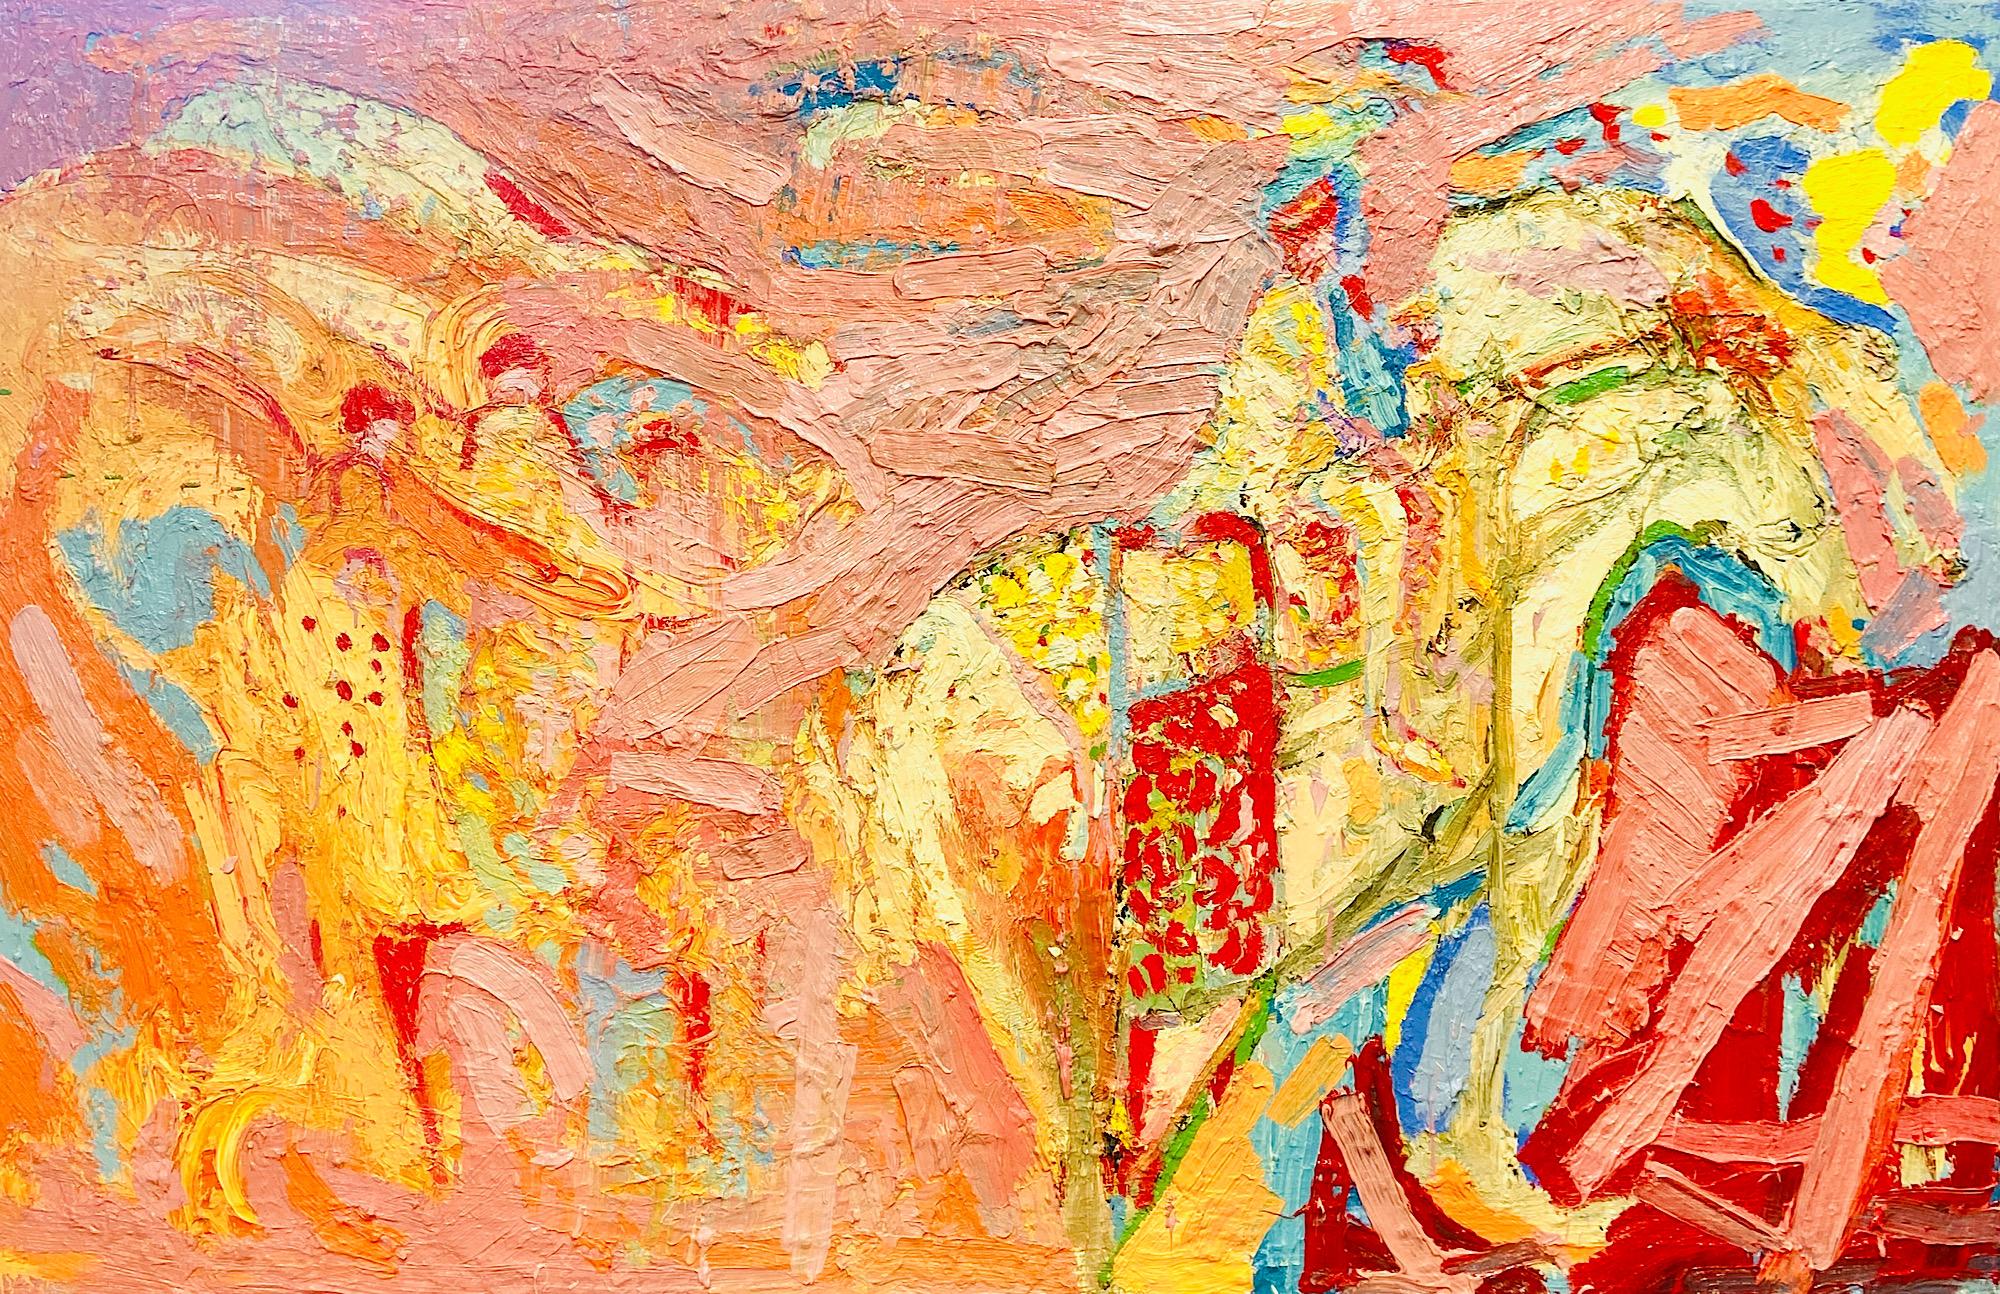 Paul wadsworth Figurative Painting - Rajasthan Wedding Horse. Large Abstract Expressionist Oil Painting